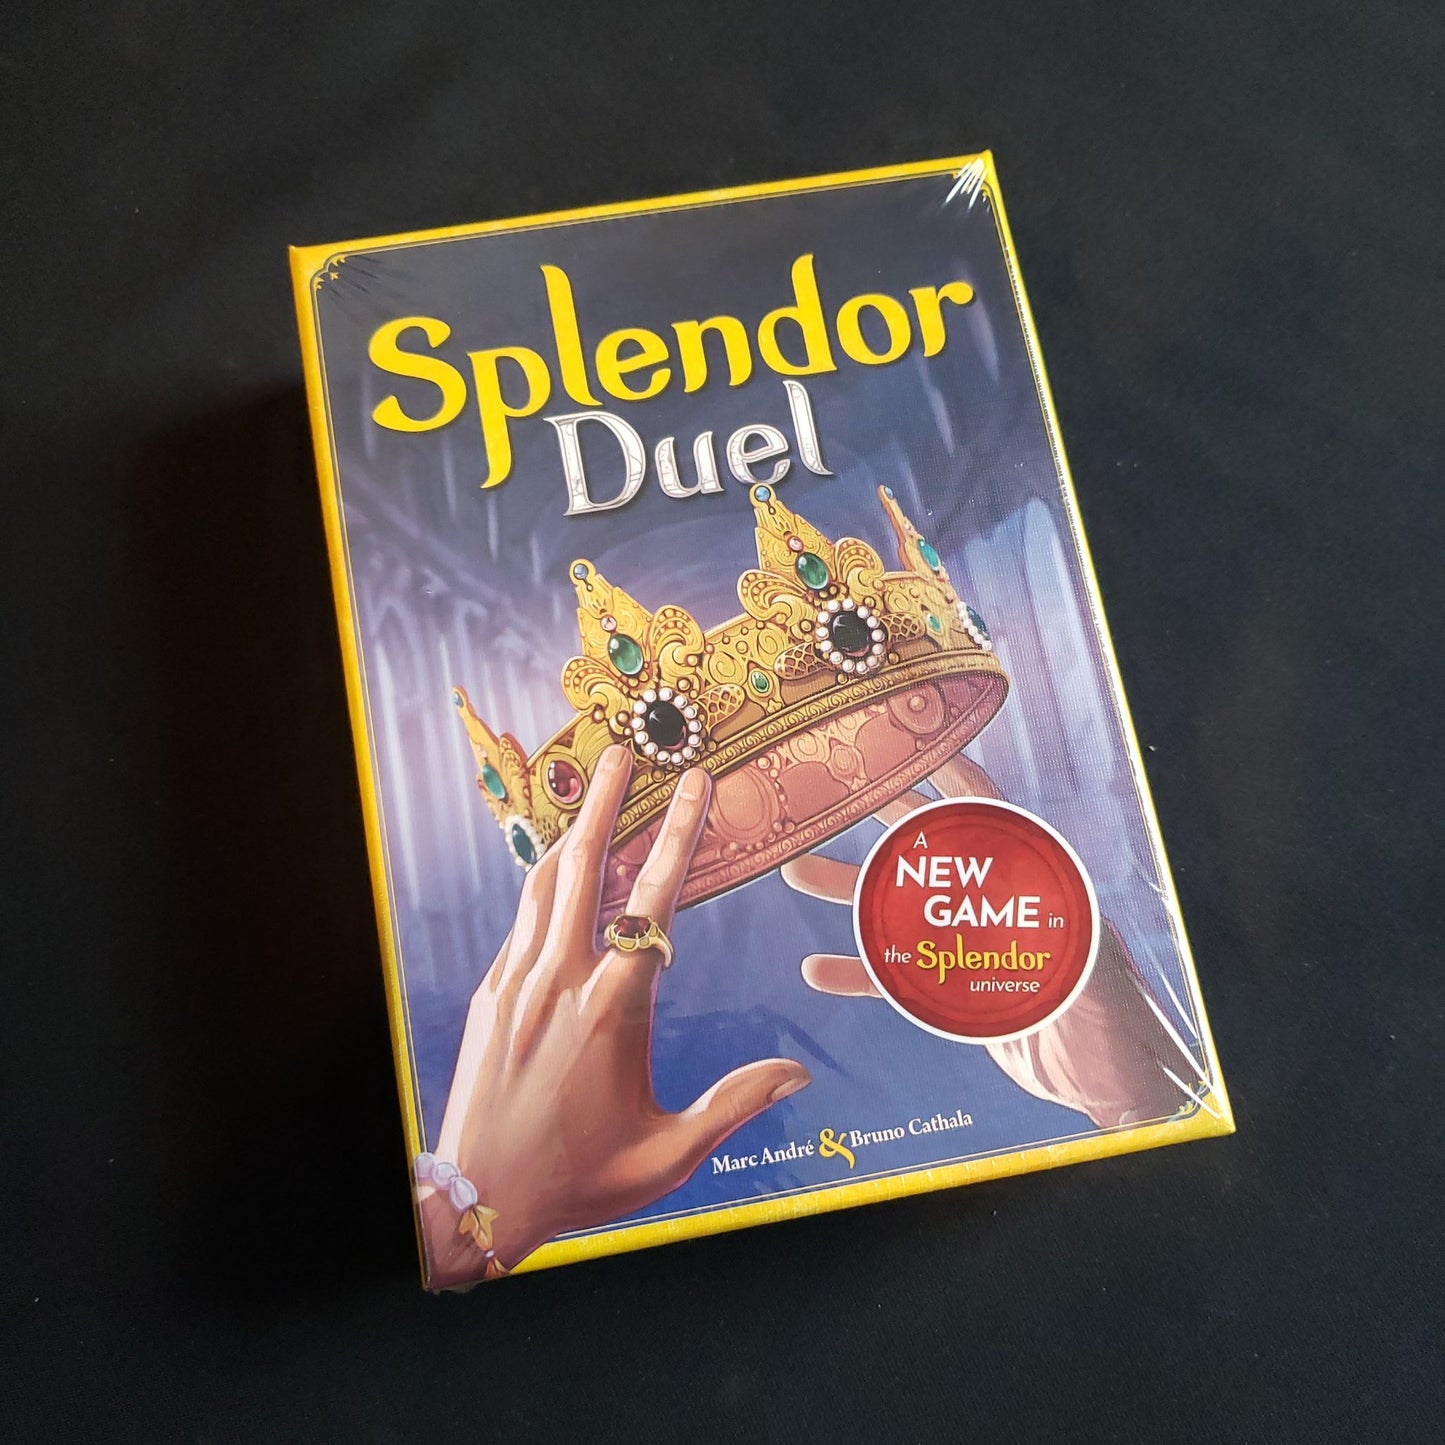 Image shows the front cover of the box of the Splendor Duel board game